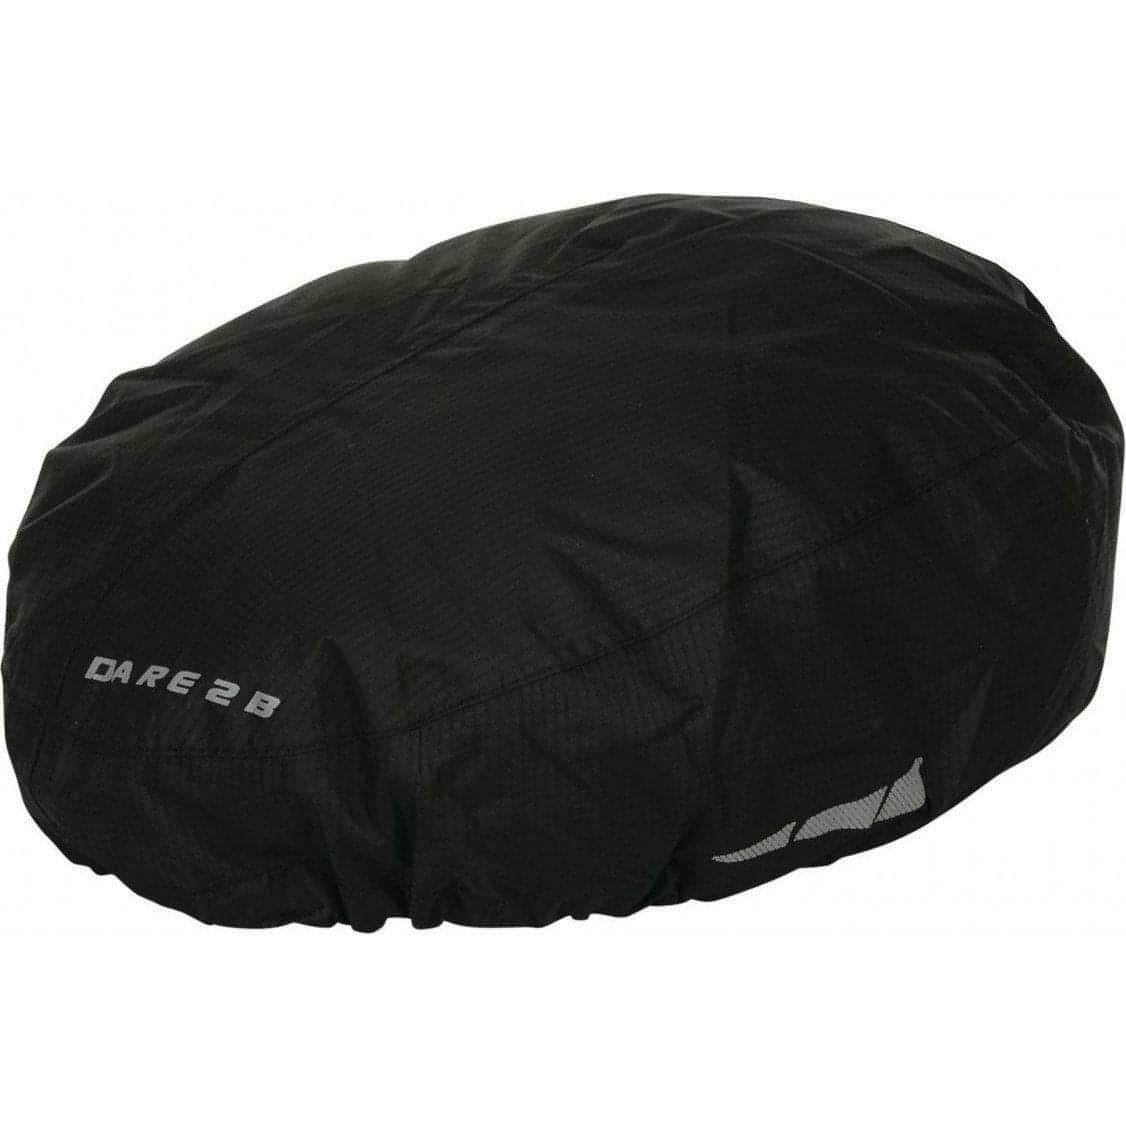 Dare2B Hold Off Cycling Waterproof Helmet Cover - Black 5051522435646 - Start Fitness